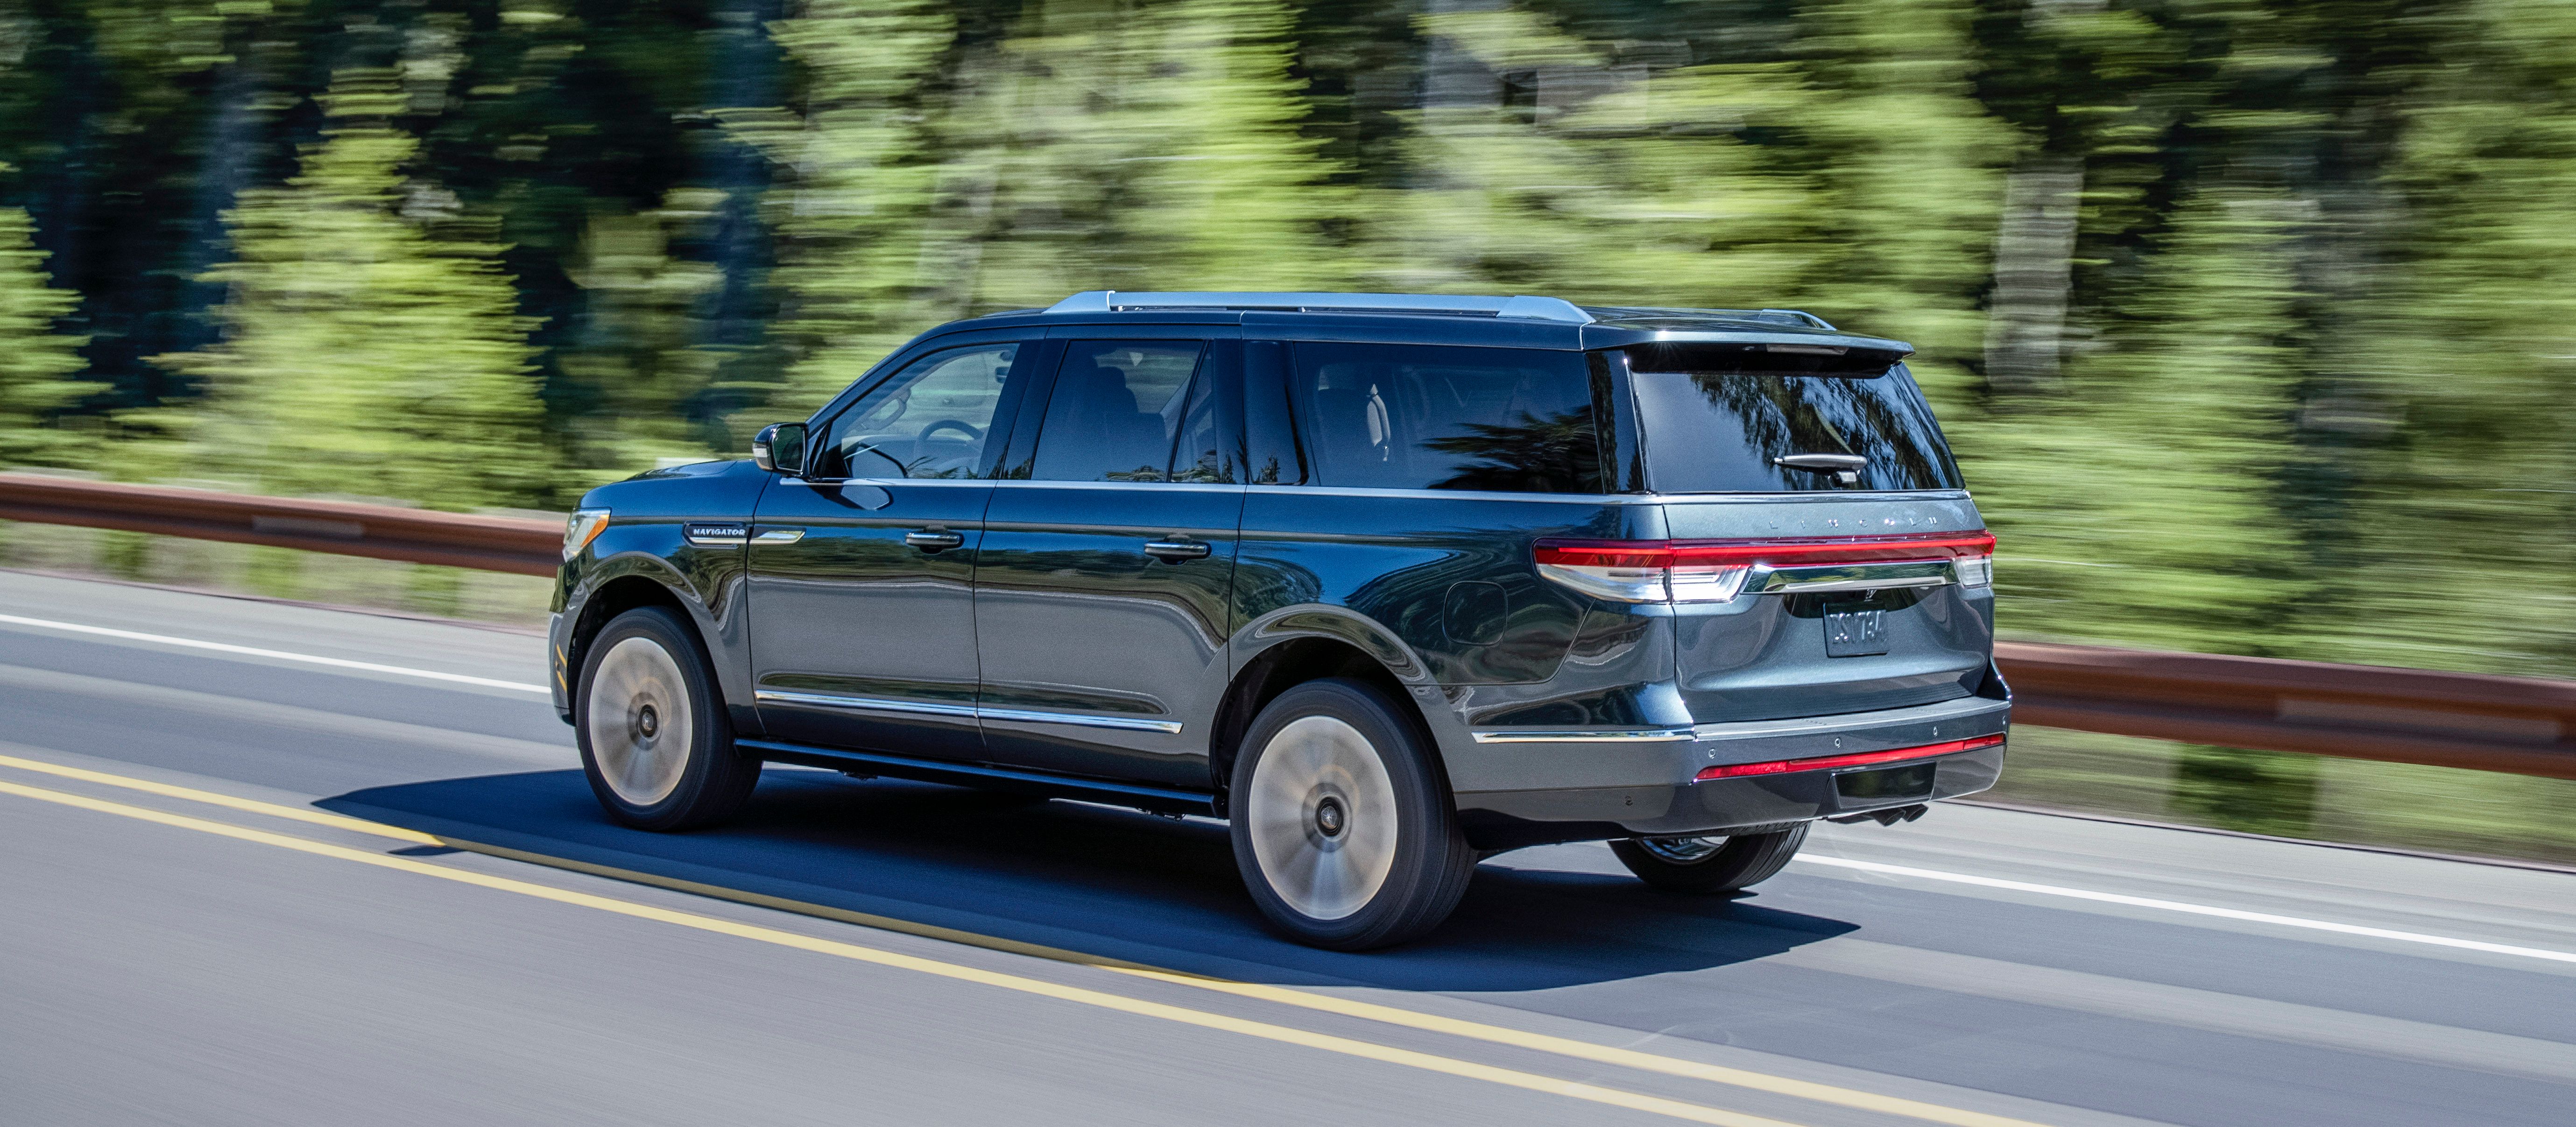 2022 Lincoln Navigator - An SUV That's Heavy On Tech Features And Luxury